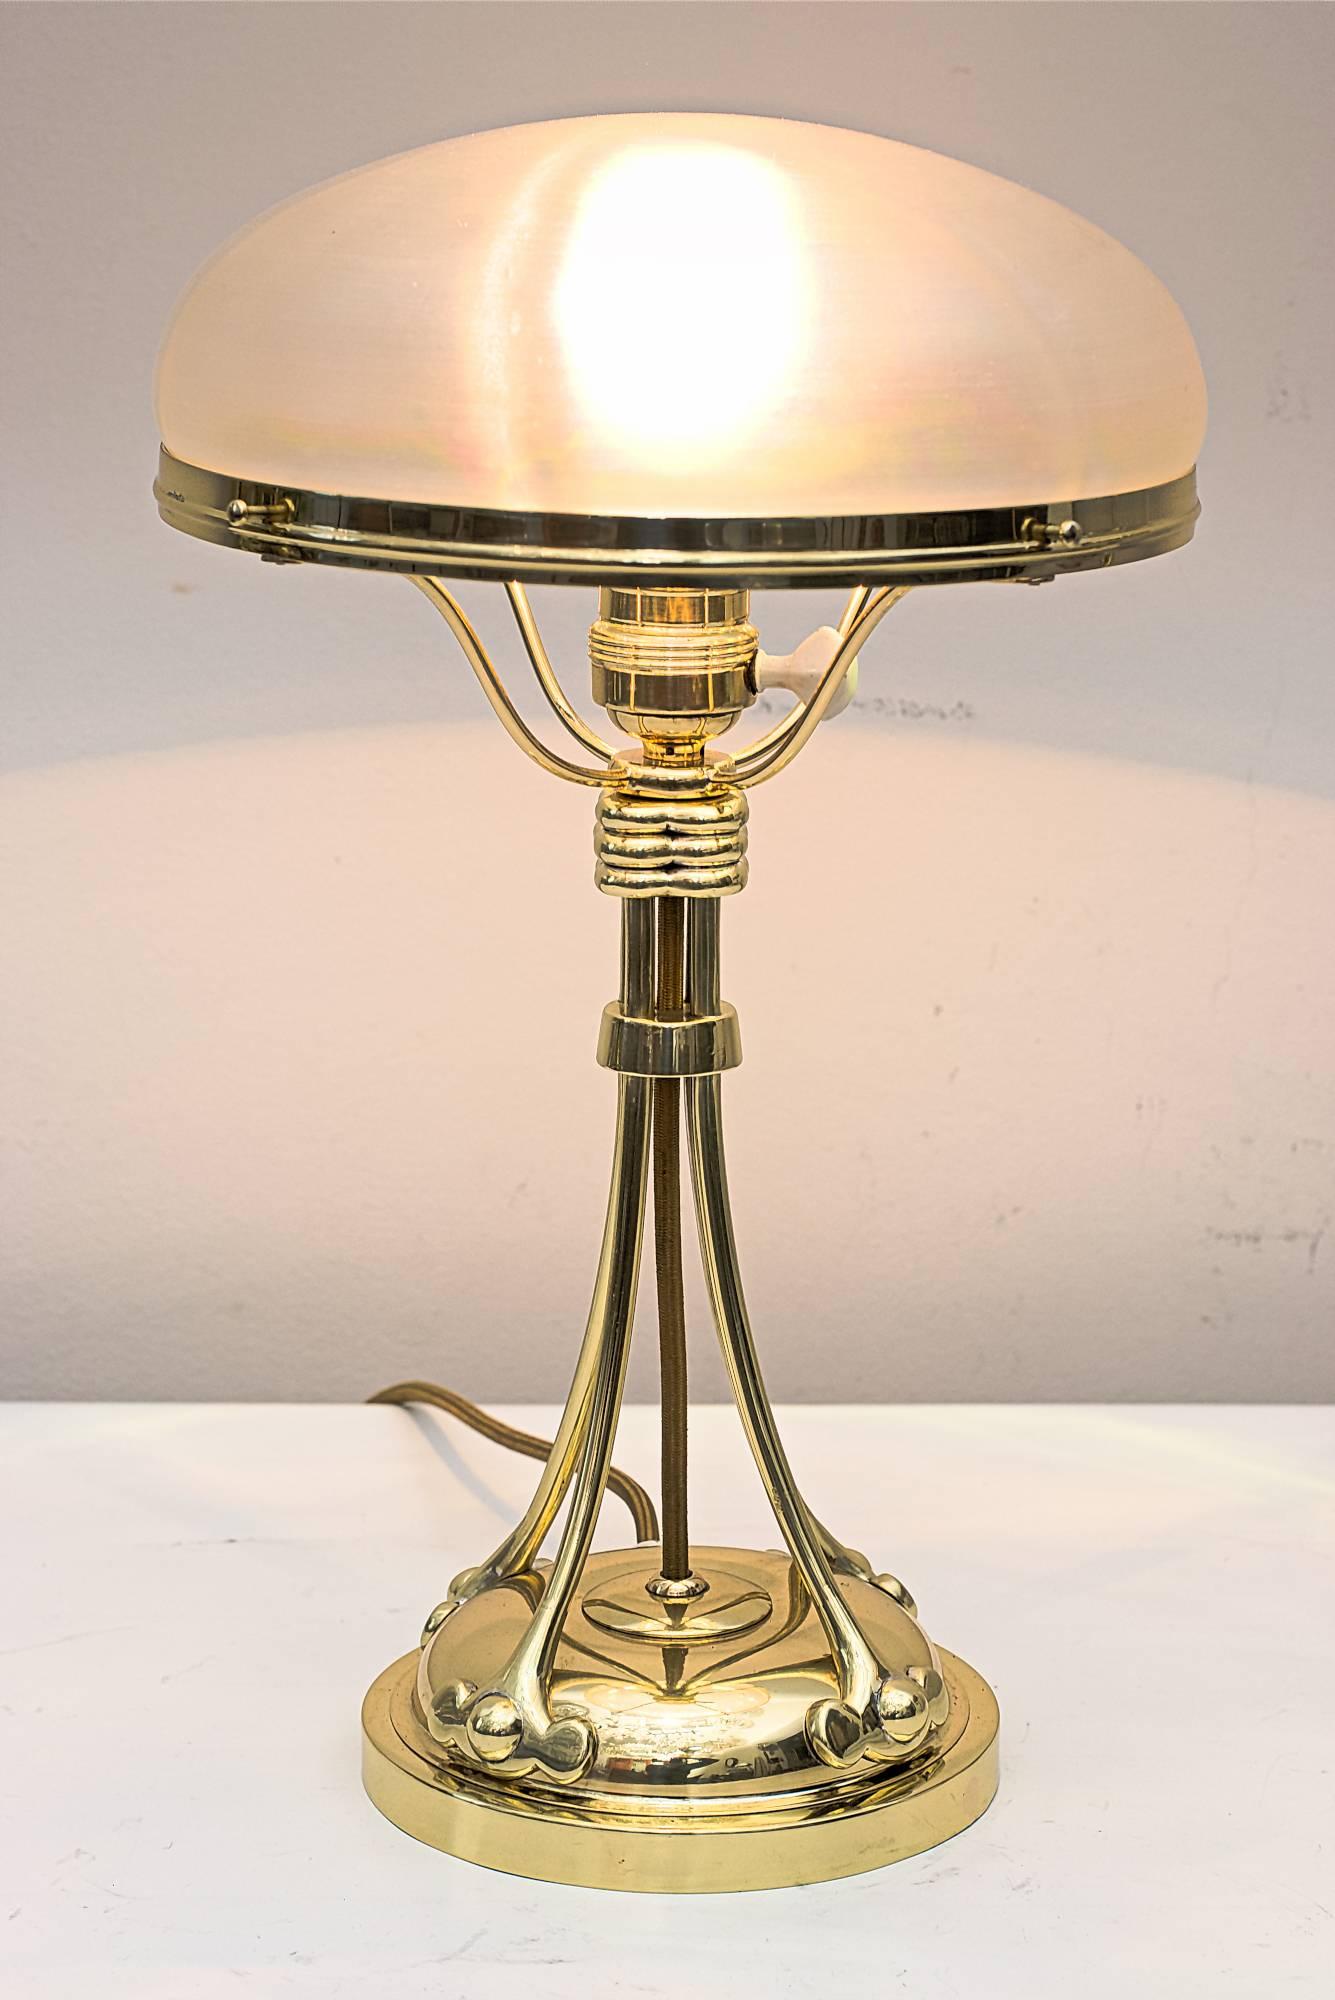 Austrian Charming Jugendstil Table Lamp with Beautiful Glass